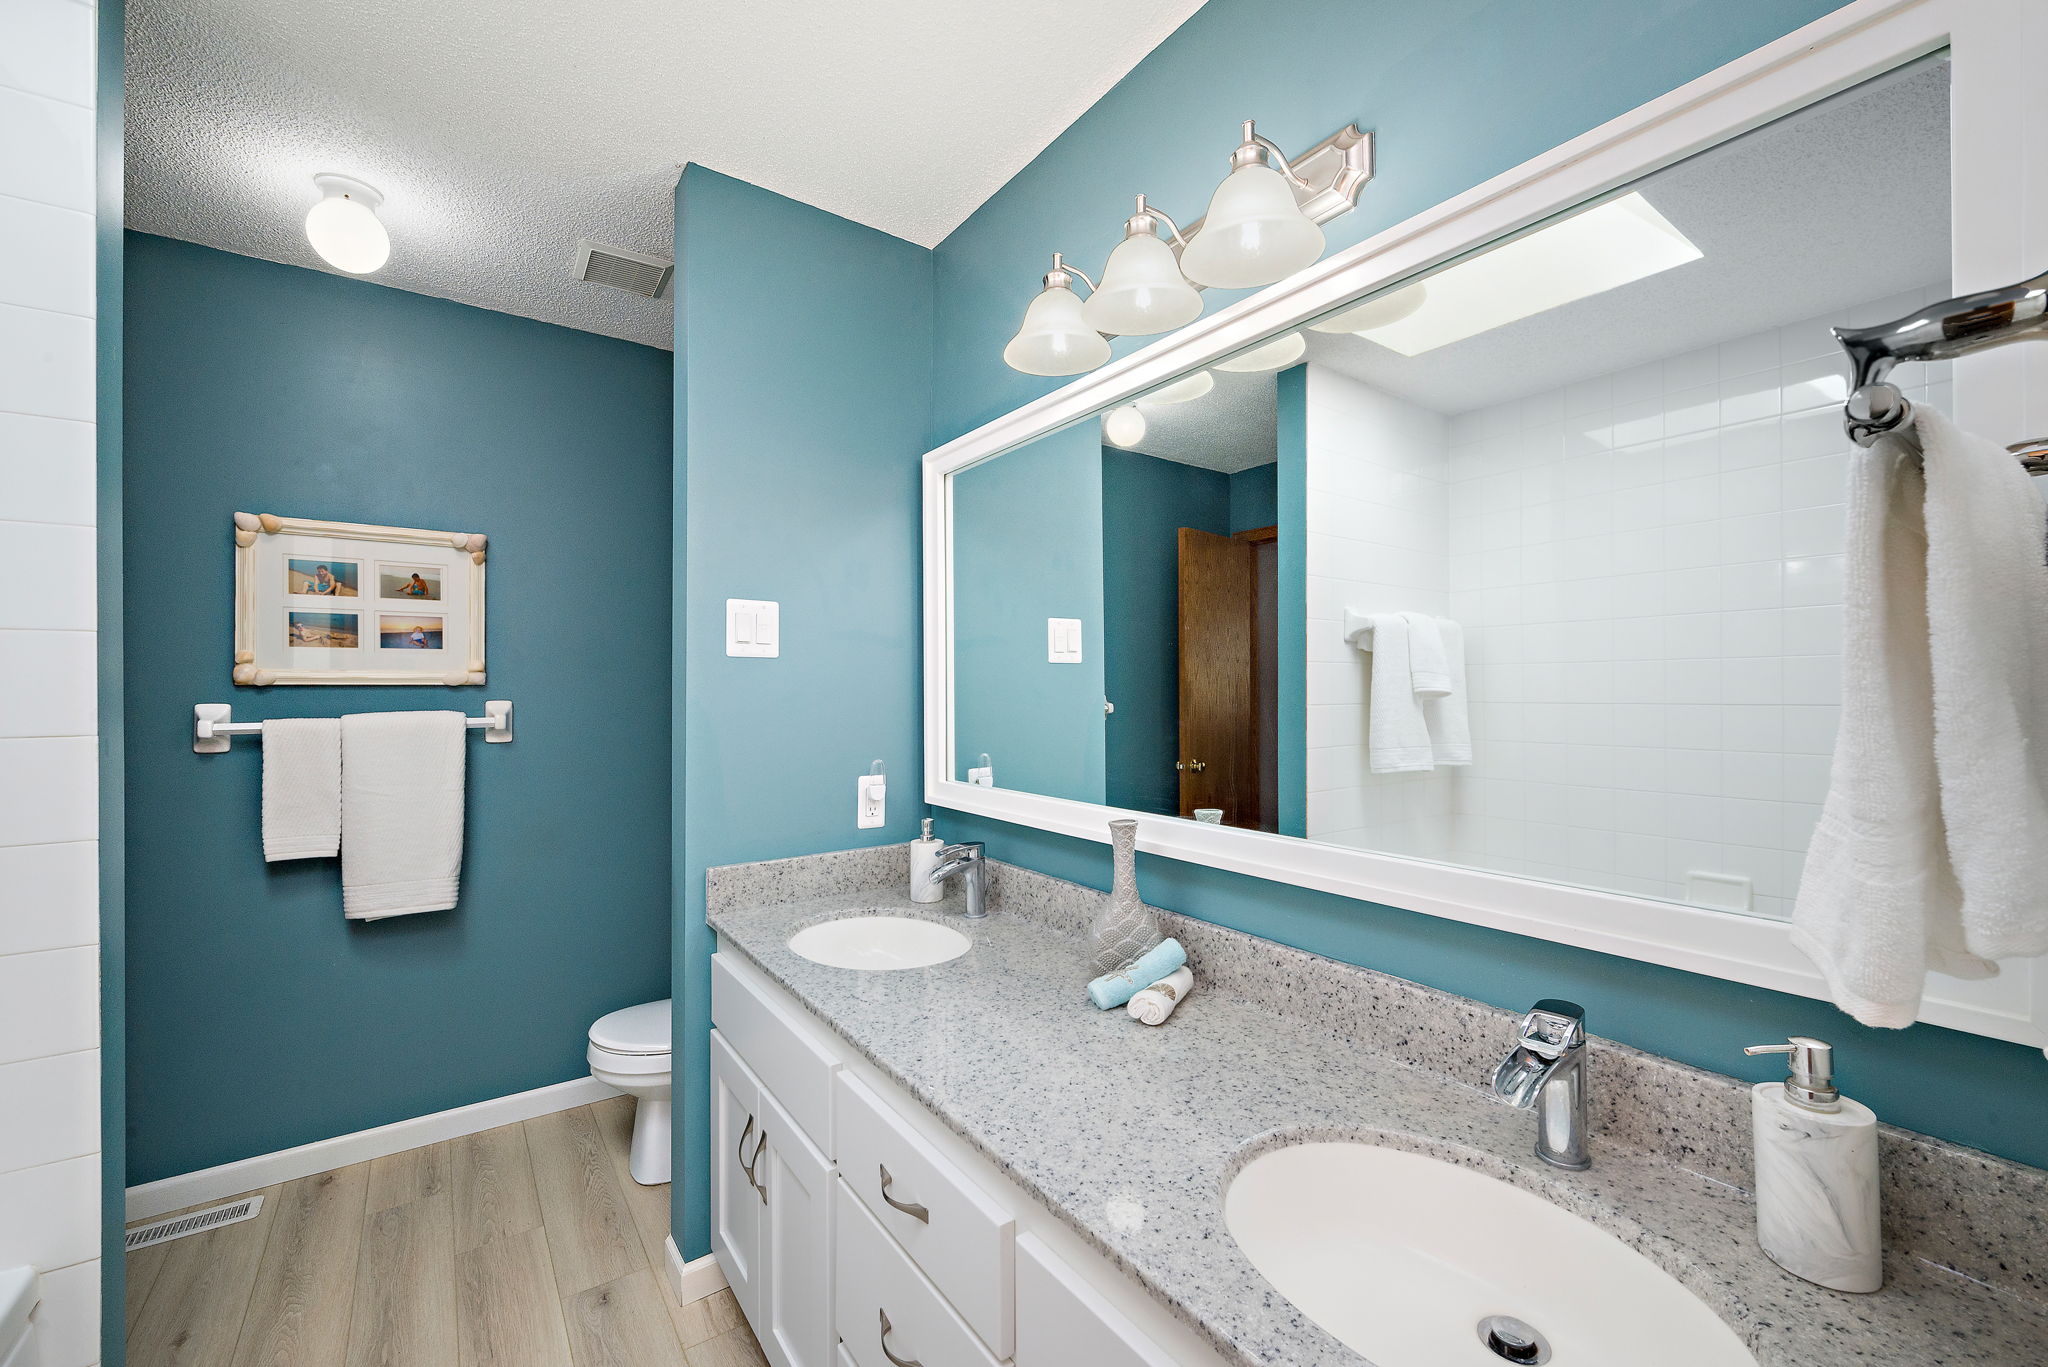 Upper level bath with dual hard surface vanity, framed mirror and LVT flooring